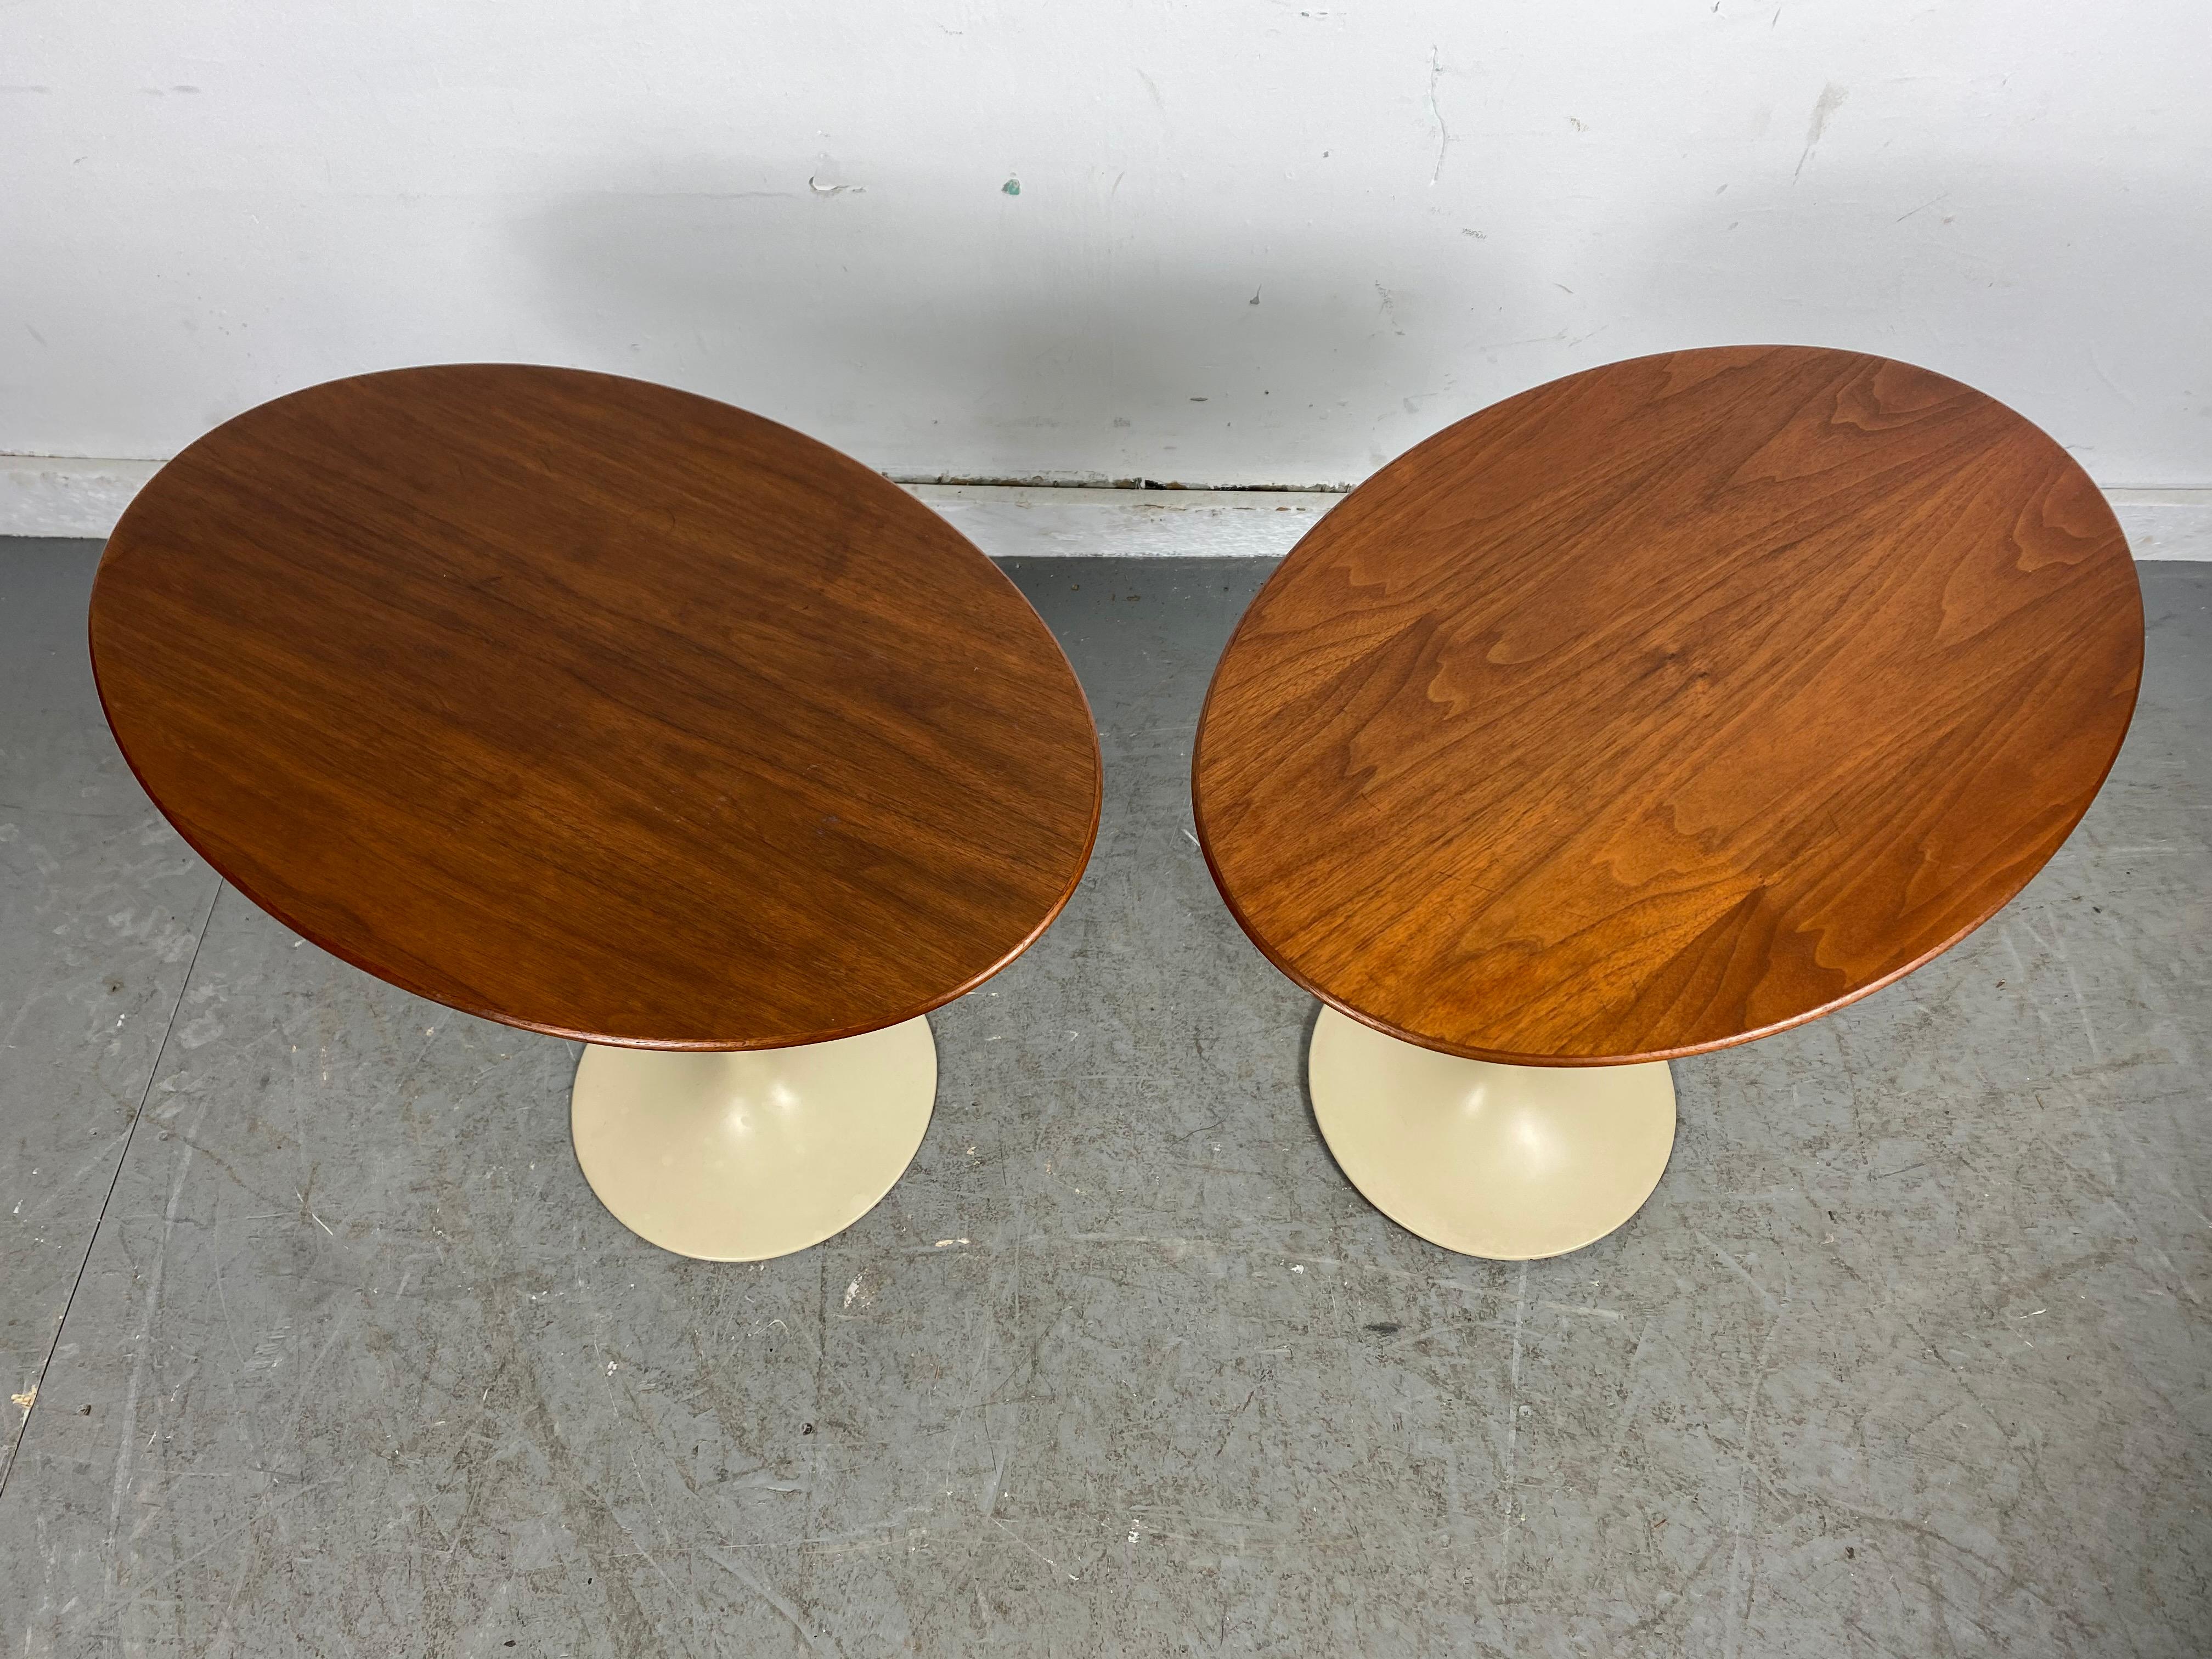 Late 20th Century Early Pair of Knoll Tulip Oval Side Tables by Eero Saarinen, circa 1970s